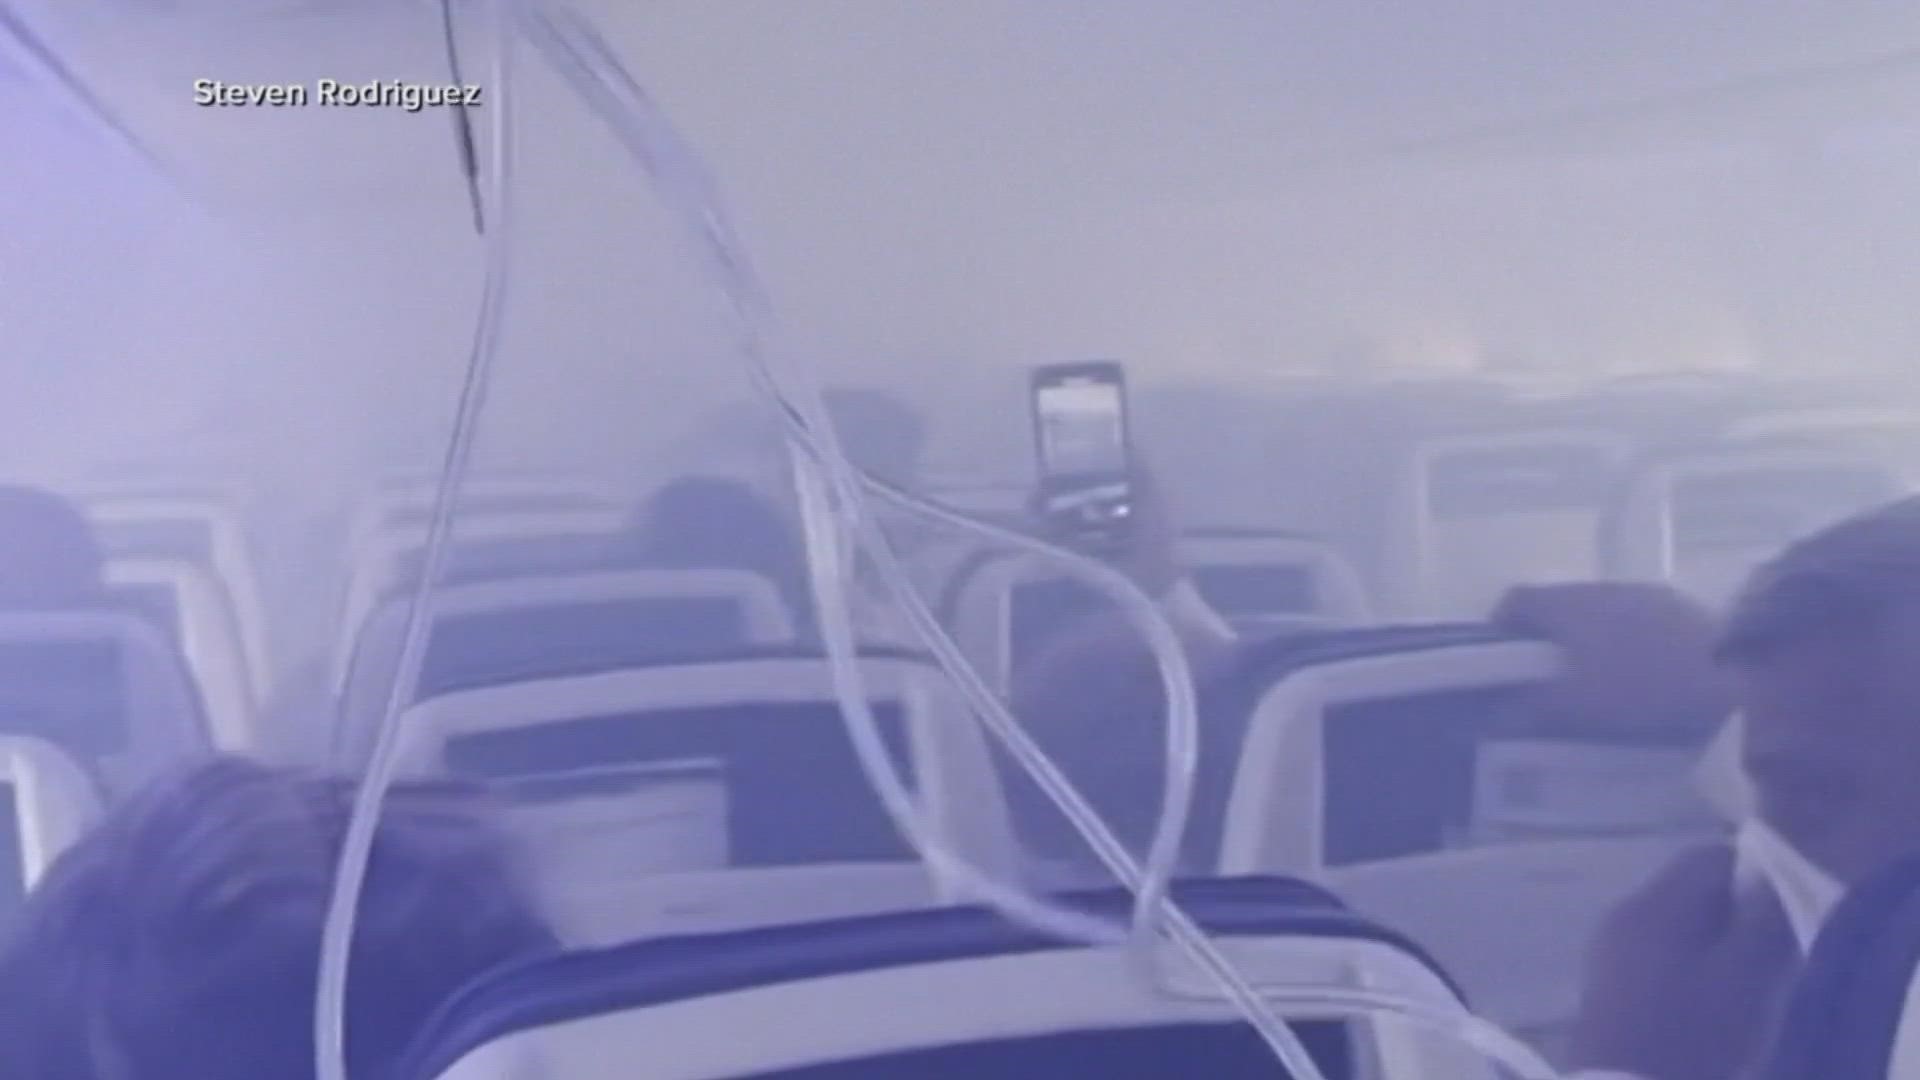 While the airline did not elaborate on the exact issues the "bird strikes" caused, video posted on social media showed smoke filling the cabin with passengers inside